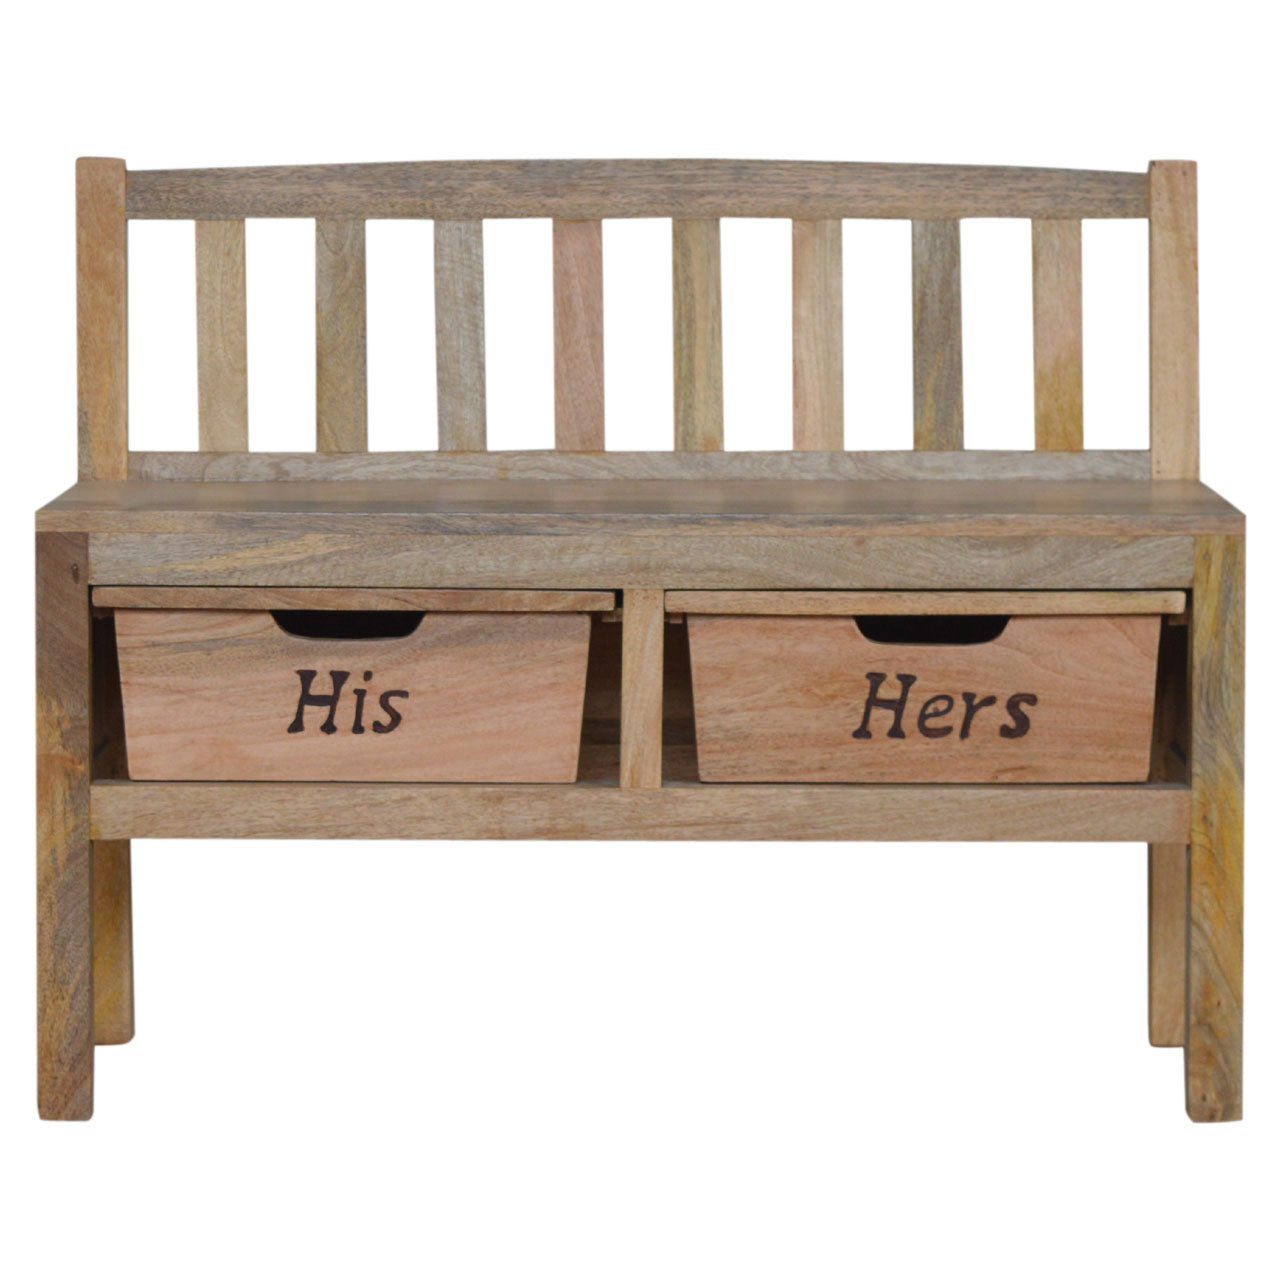 View His Hers Carved Storage Bench information